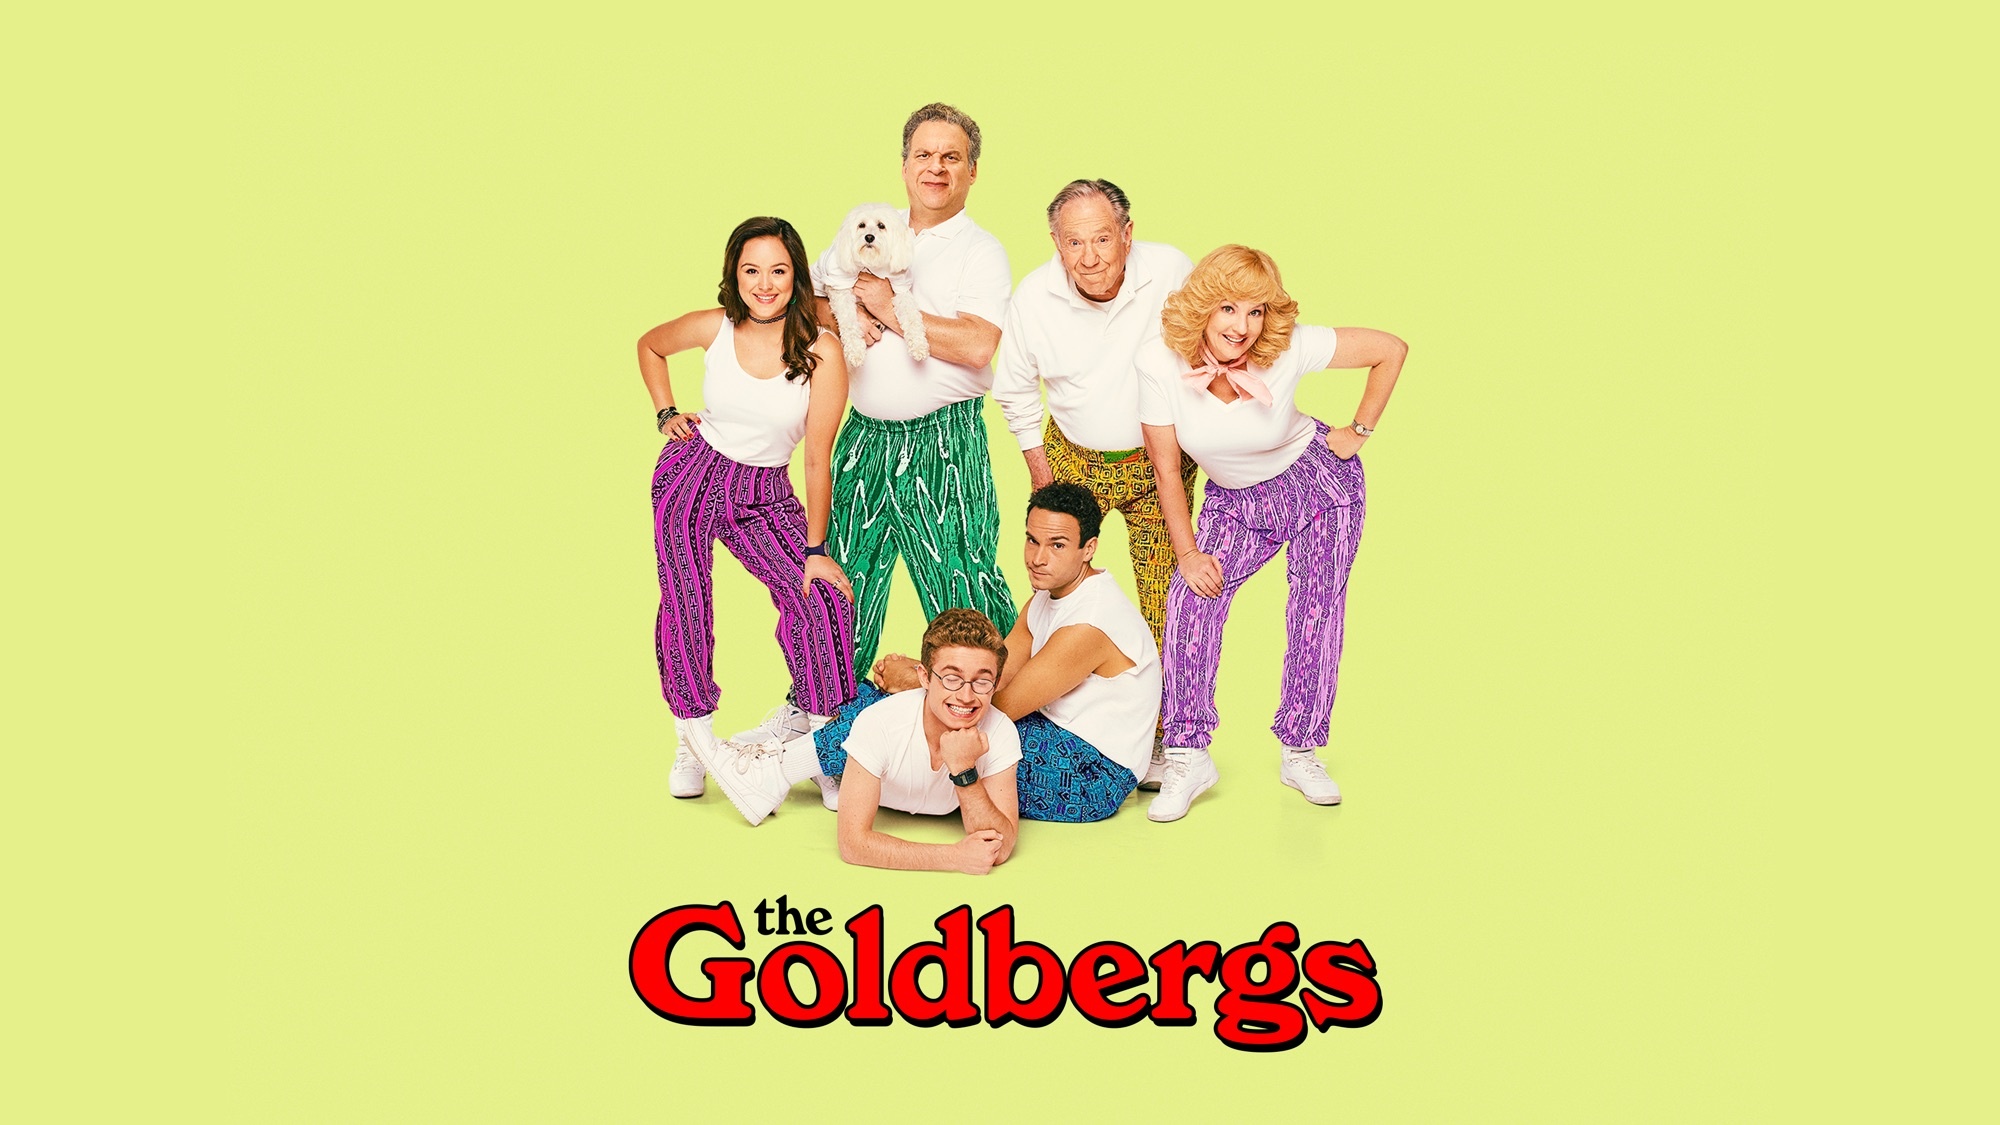 The Goldbergs HD Wallpapers and Backgrounds 2000x1130